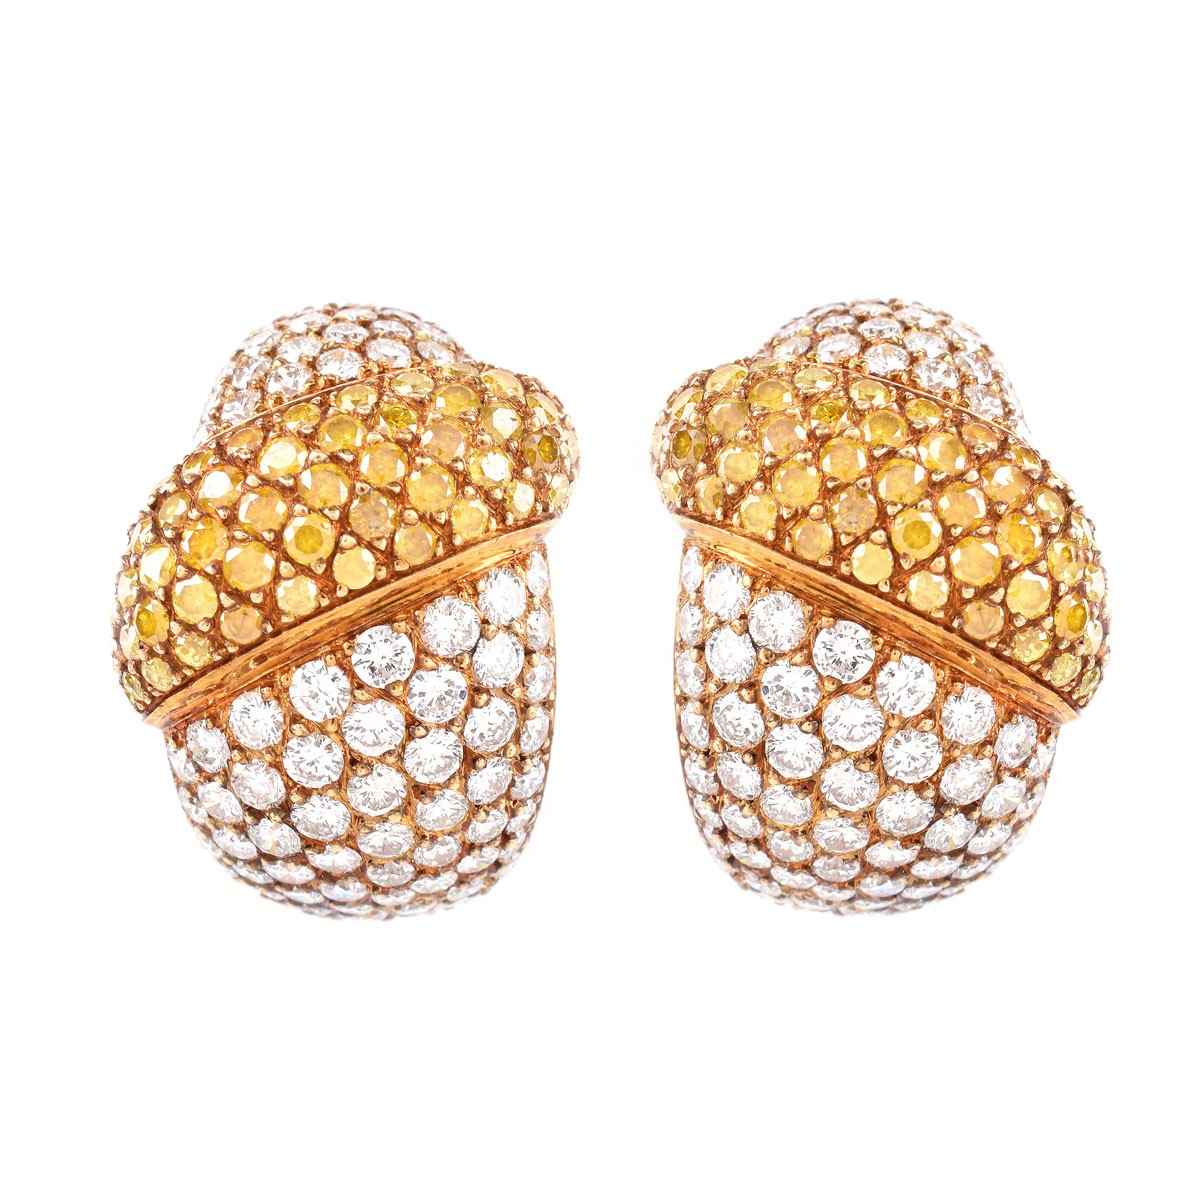 Approx. 9.0 Carat Pave Set Round Brilliant Cut Fancy Yellow and White Diamond and 18 Karat Yellow Gold Earrings.